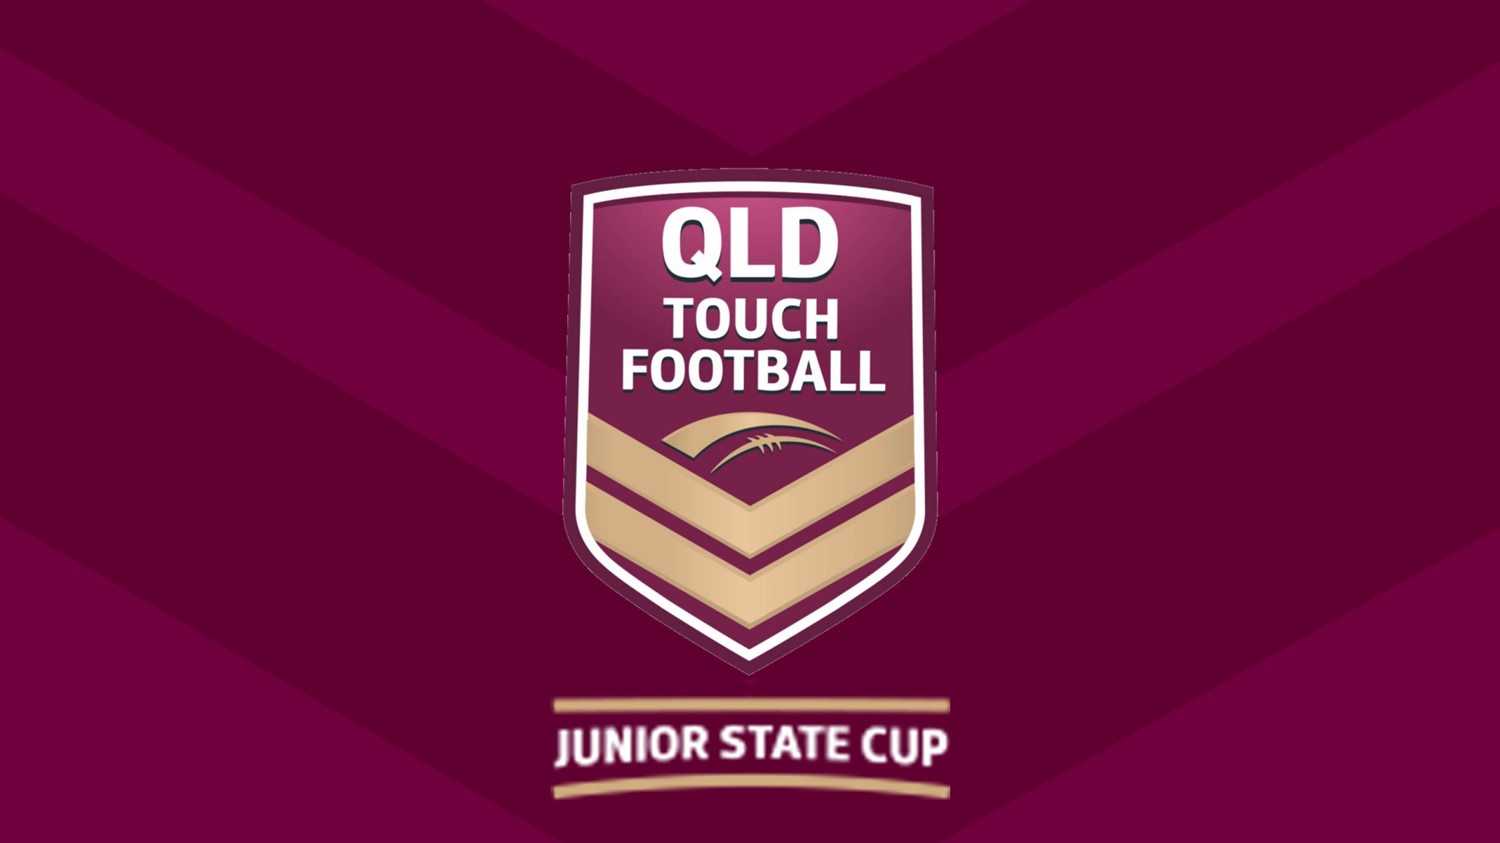 210710-QLD Junior State Cup 18 Girls Semi Final - Townsville v Gold Coast Touch Association Minigame Slate Image